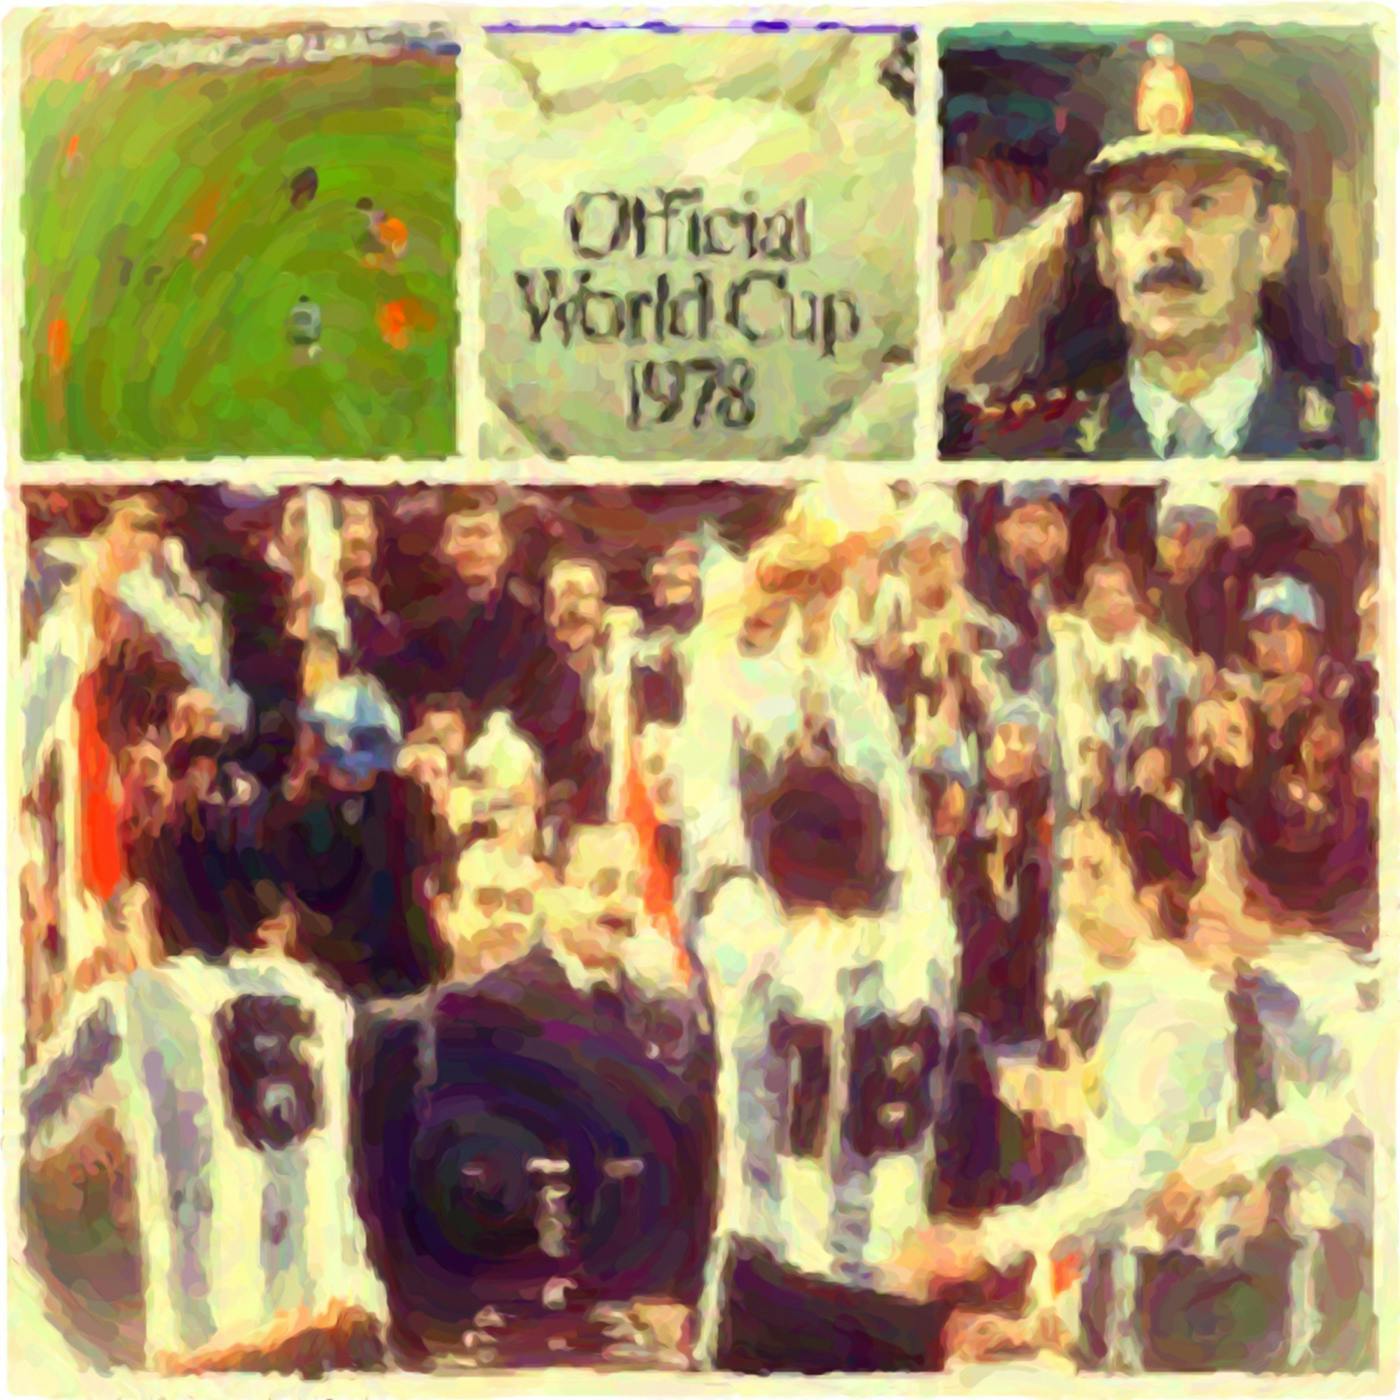 Soccer and Repression: The 1978 World Cup in Argentina